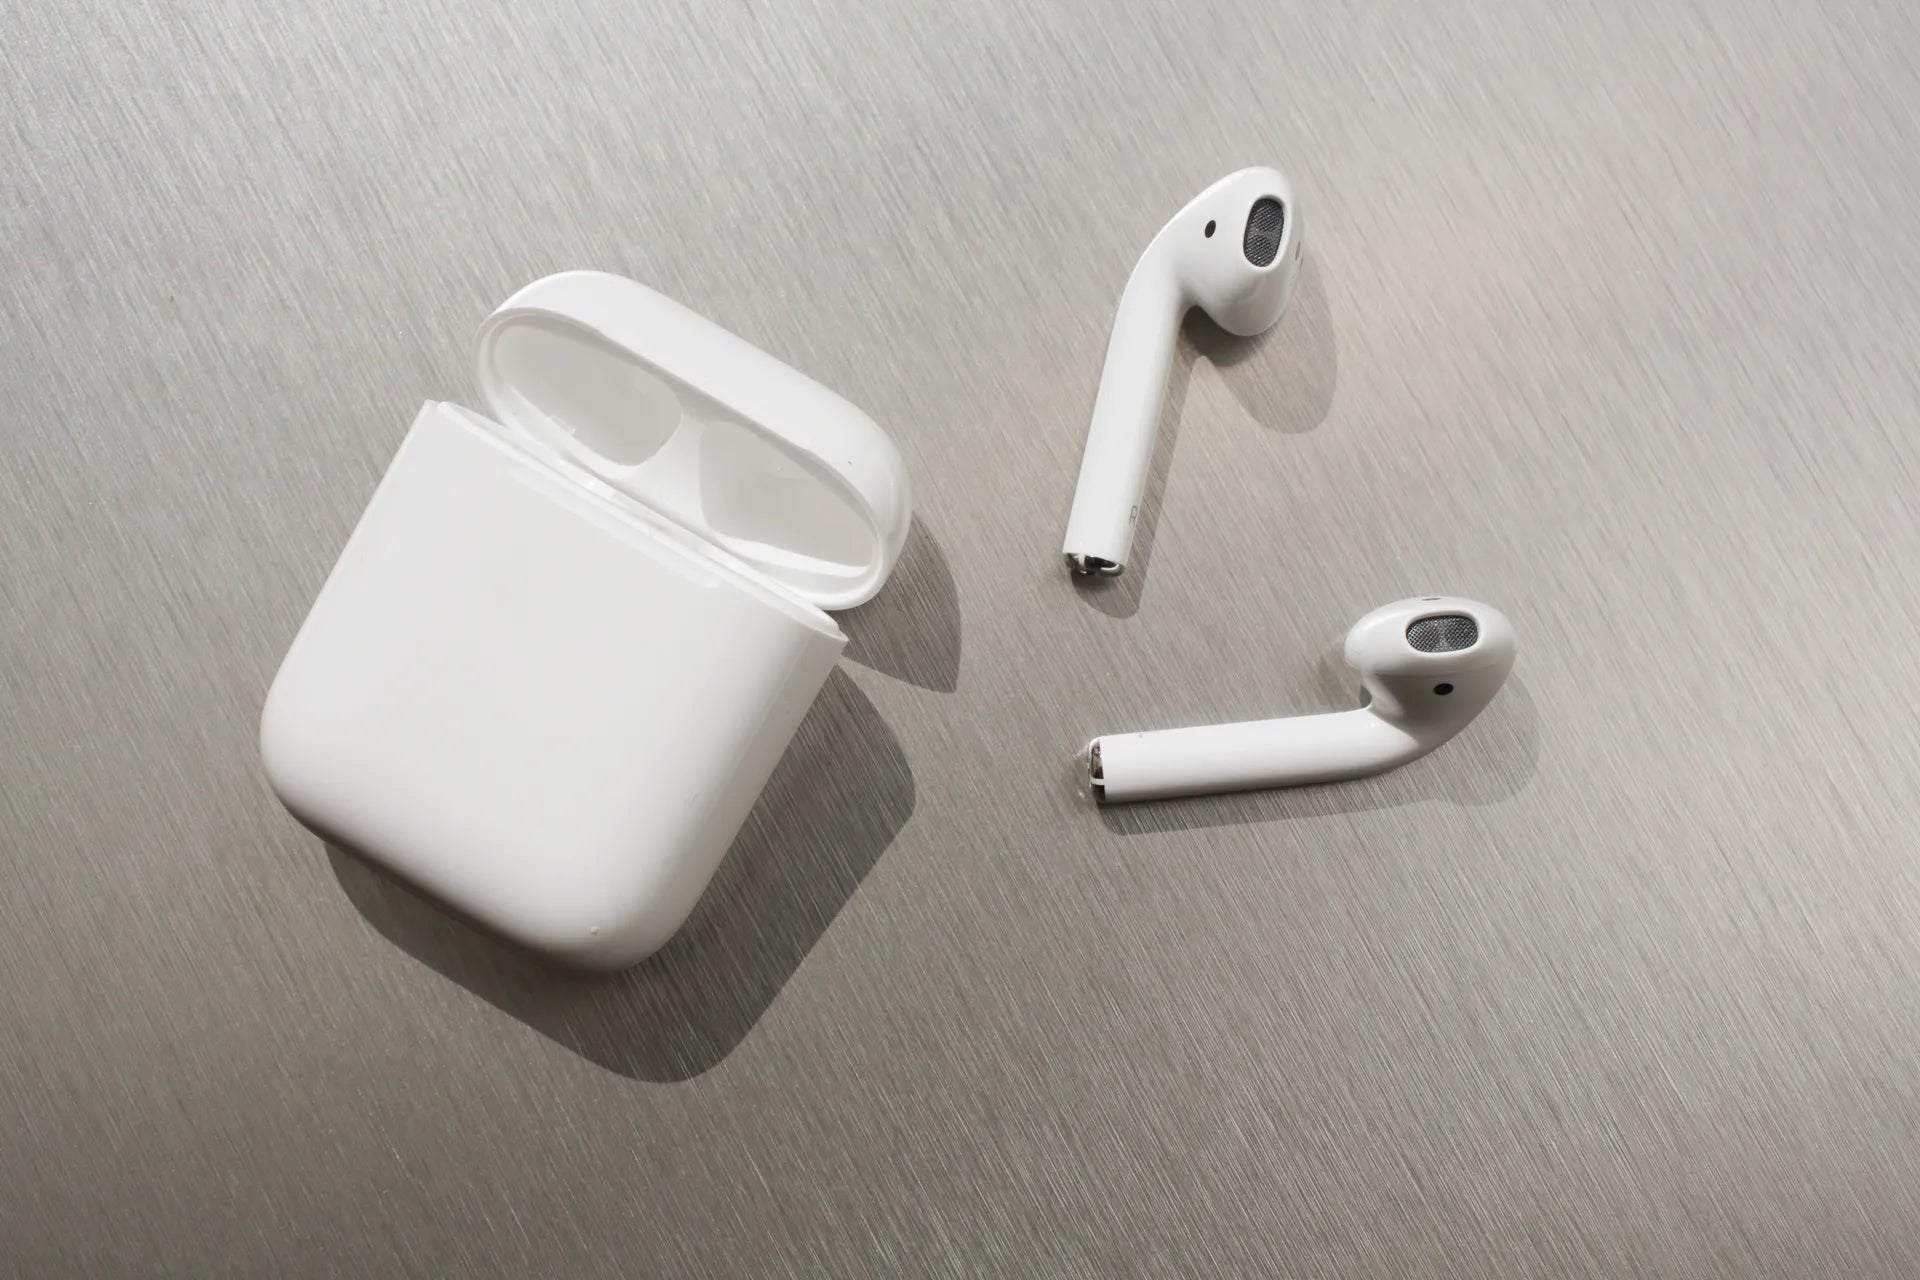 Airpods top 10 holiday gift ideas for her